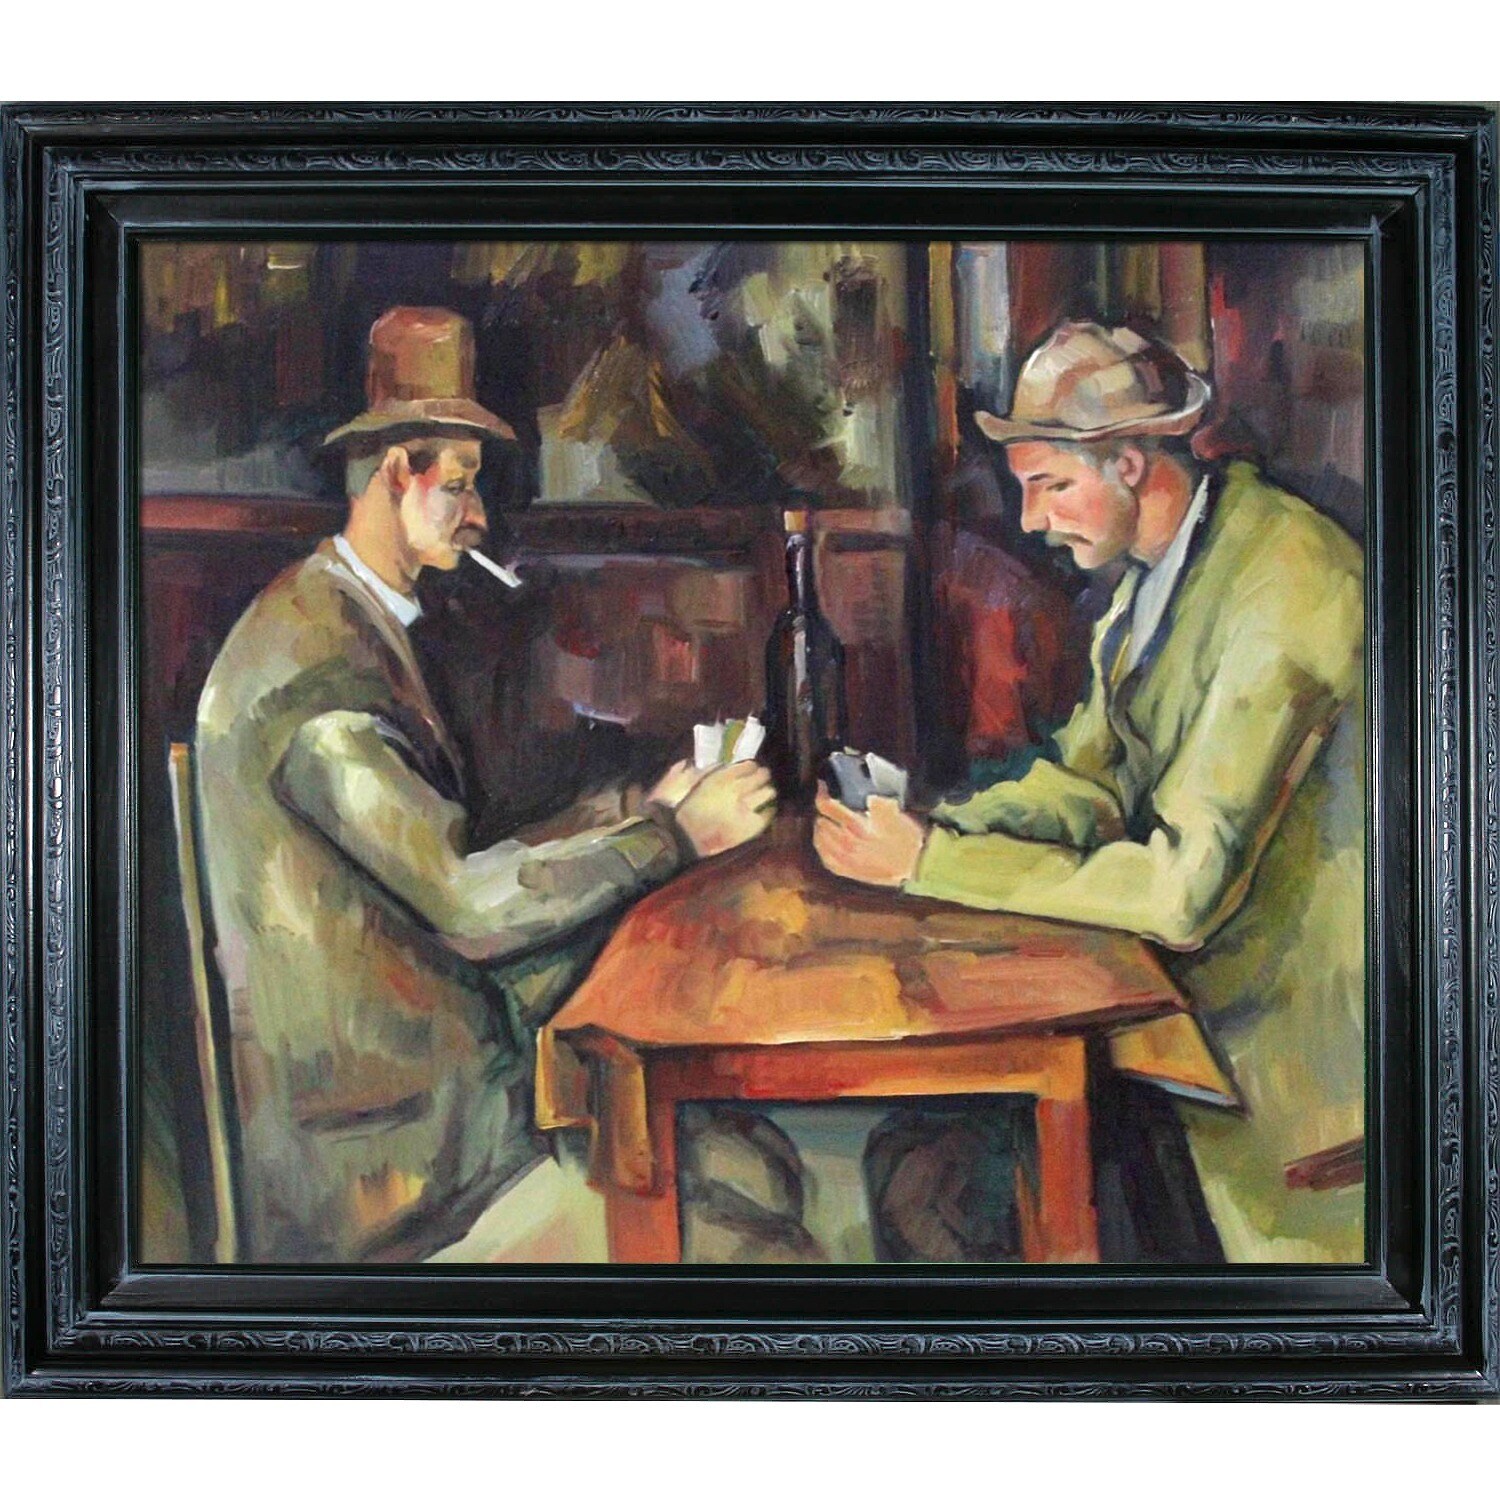 UPC 688576100050 product image for Paul Cezanne Card Players with Pipes Hand Painted Framed Canvas Art | upcitemdb.com